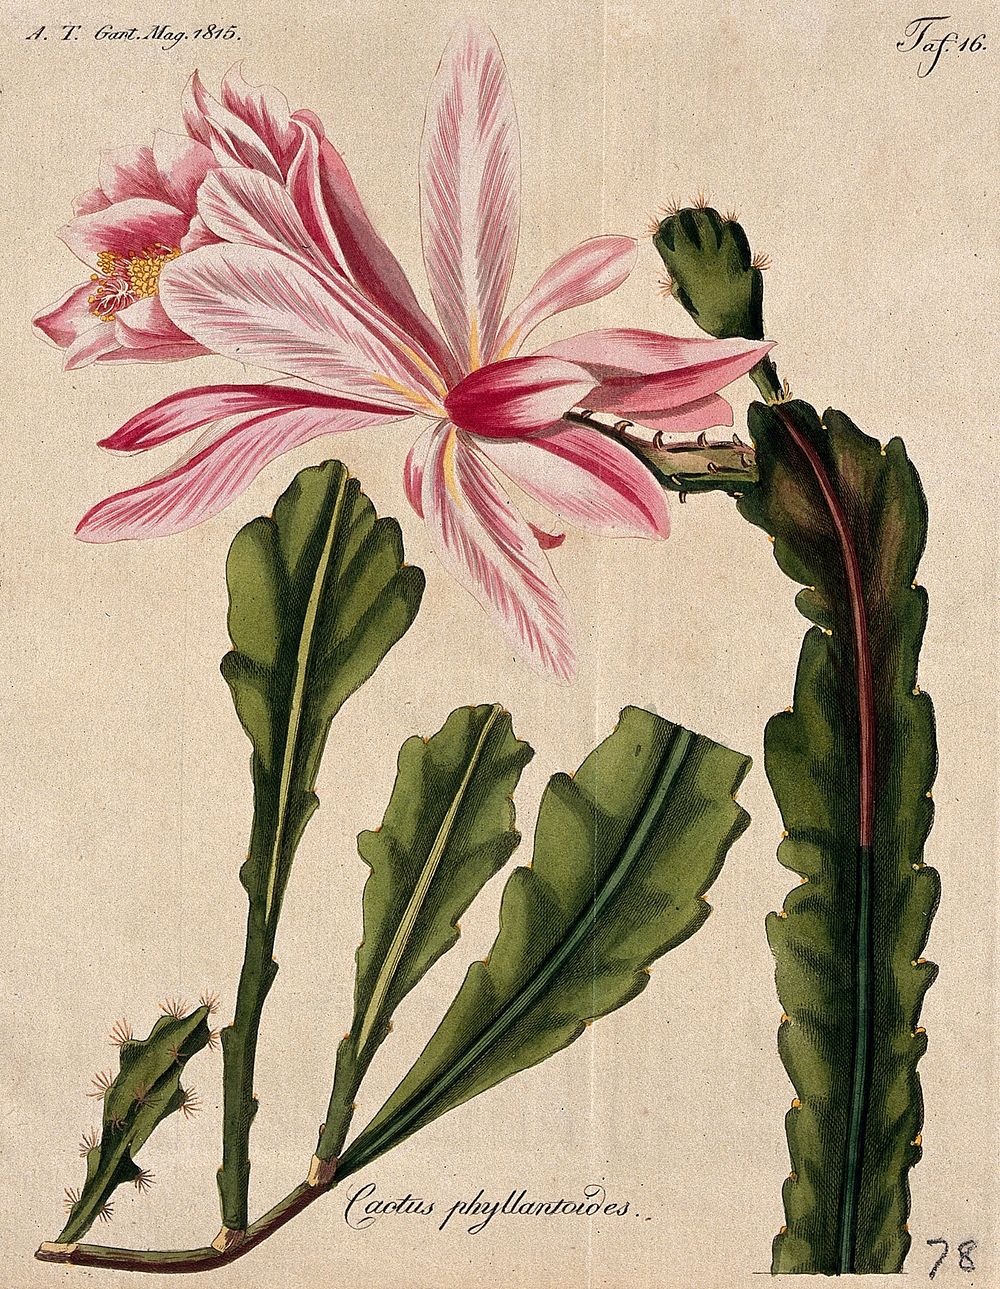 A flowering cactus, possibly a night-flowering cactus (Epiphyllum species). Coloured etching, c. 1815.